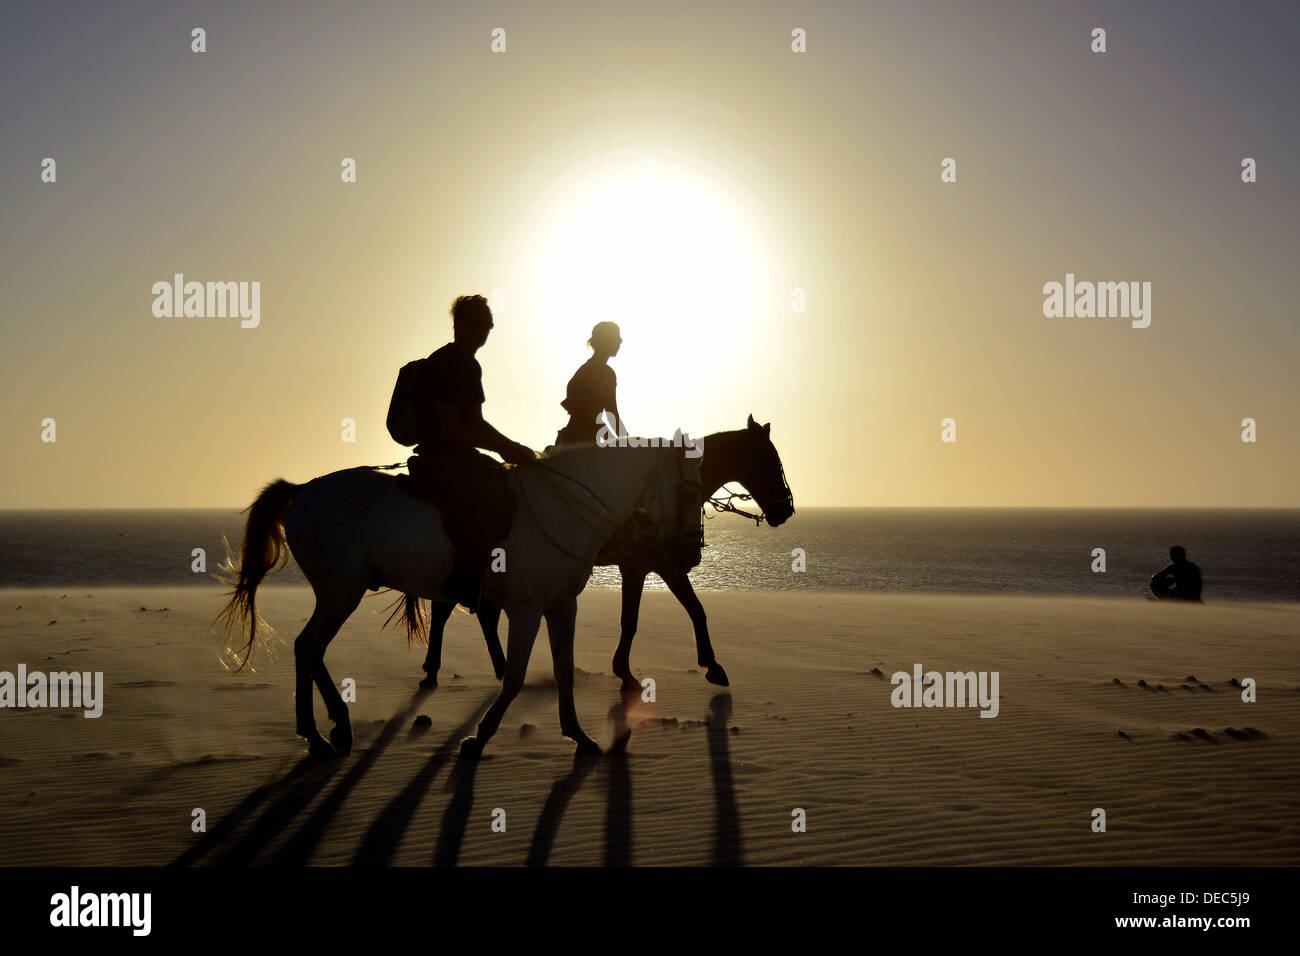 Two riders on horseback on the beach, silhouette at sunset, Jericoacoara, Ceará, Brazil Stock Photo